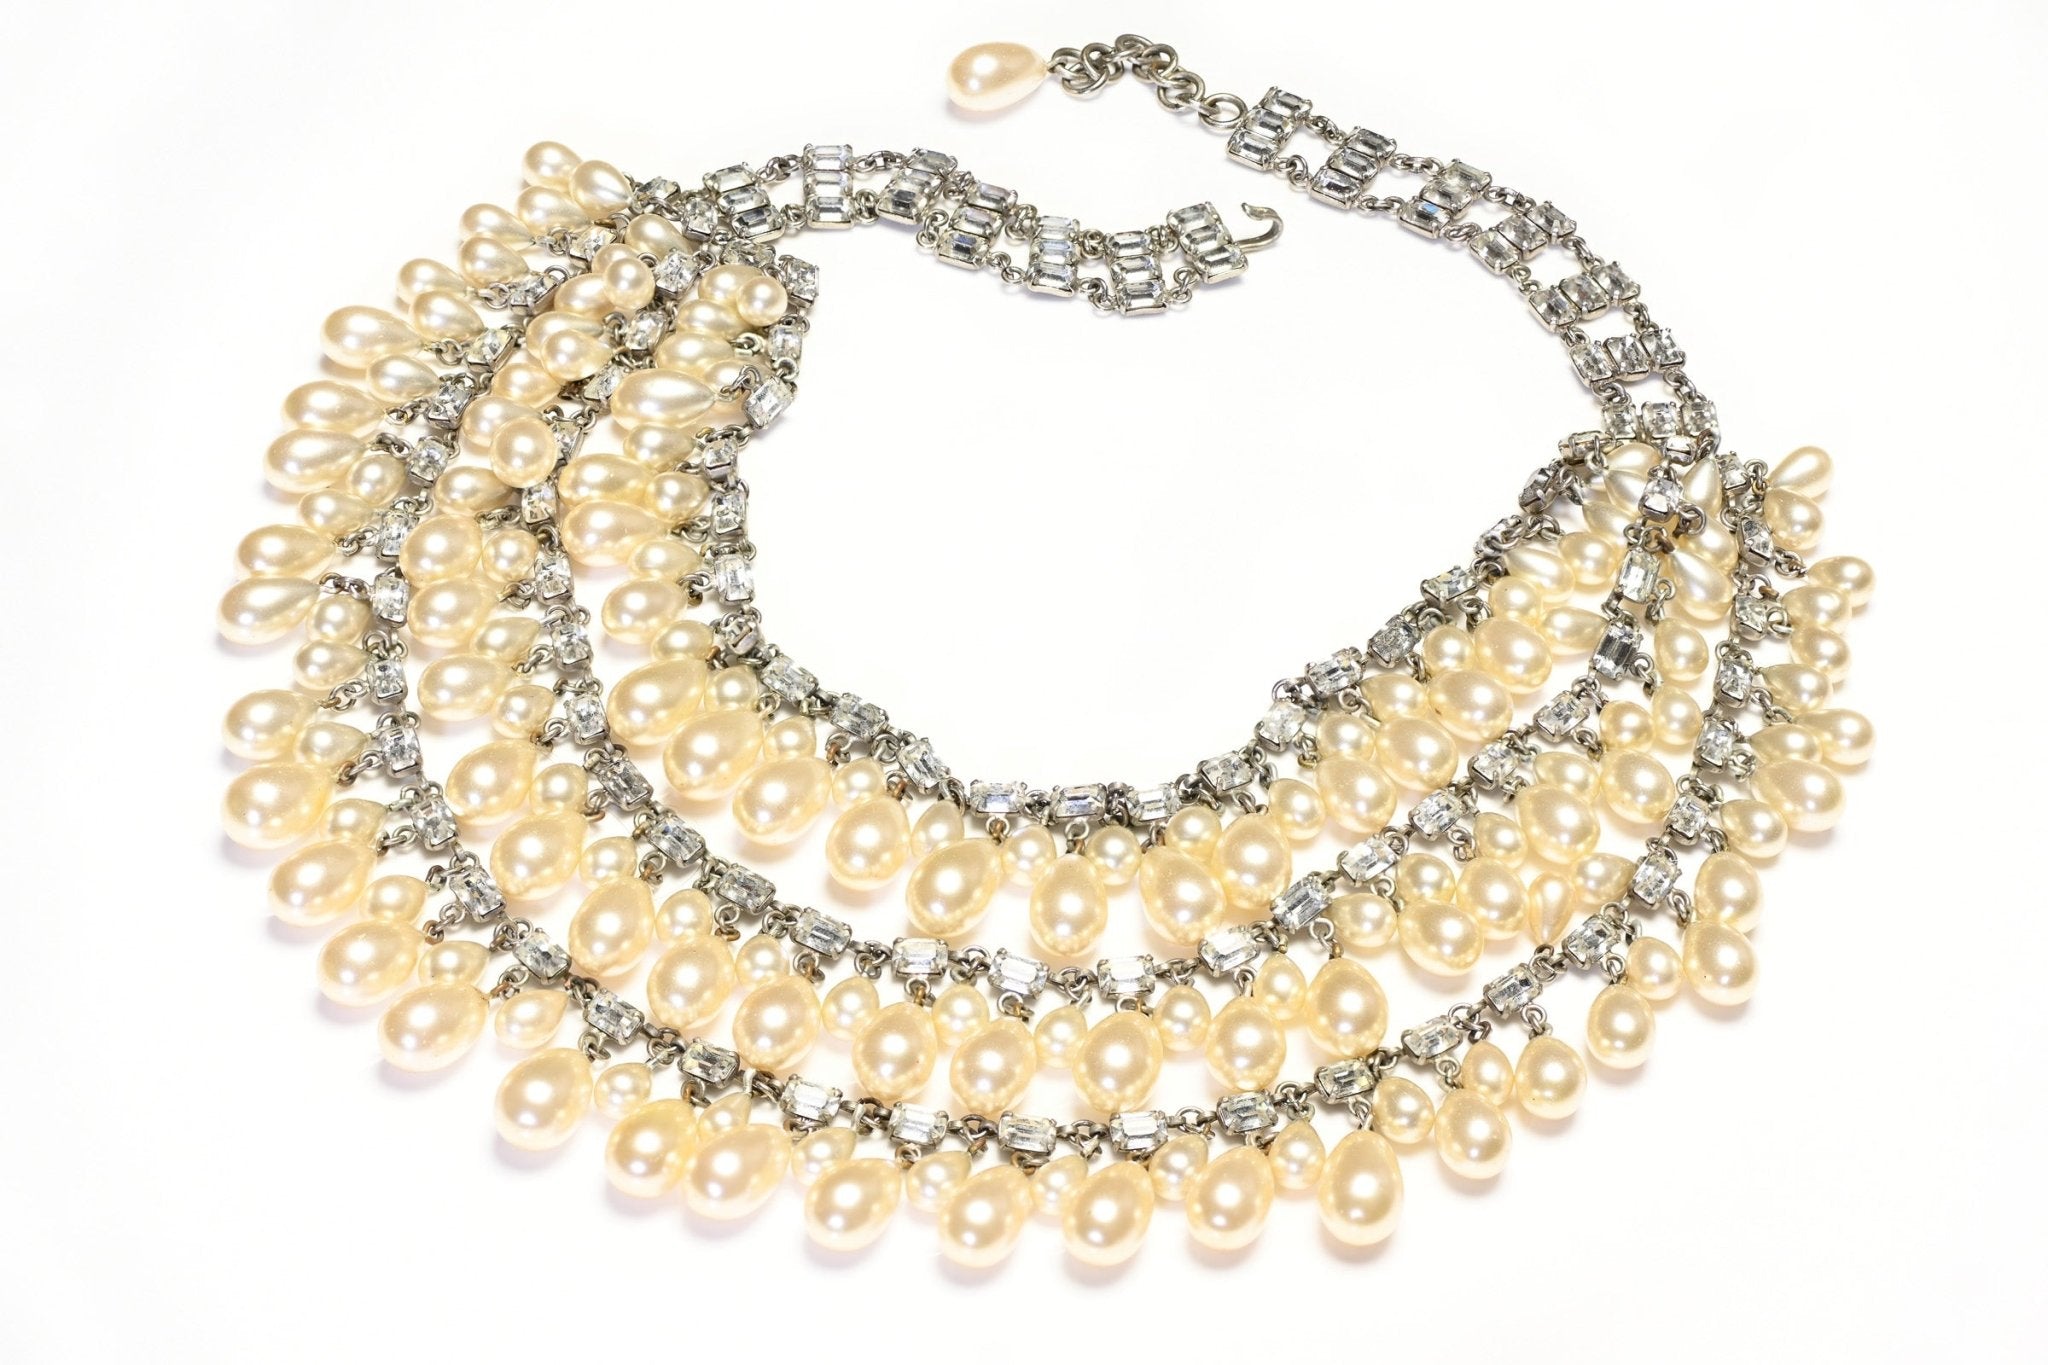 Christian Dior Paris Couture 1950's Roger Jean-Pierre Pearl Crystal Collar Necklace